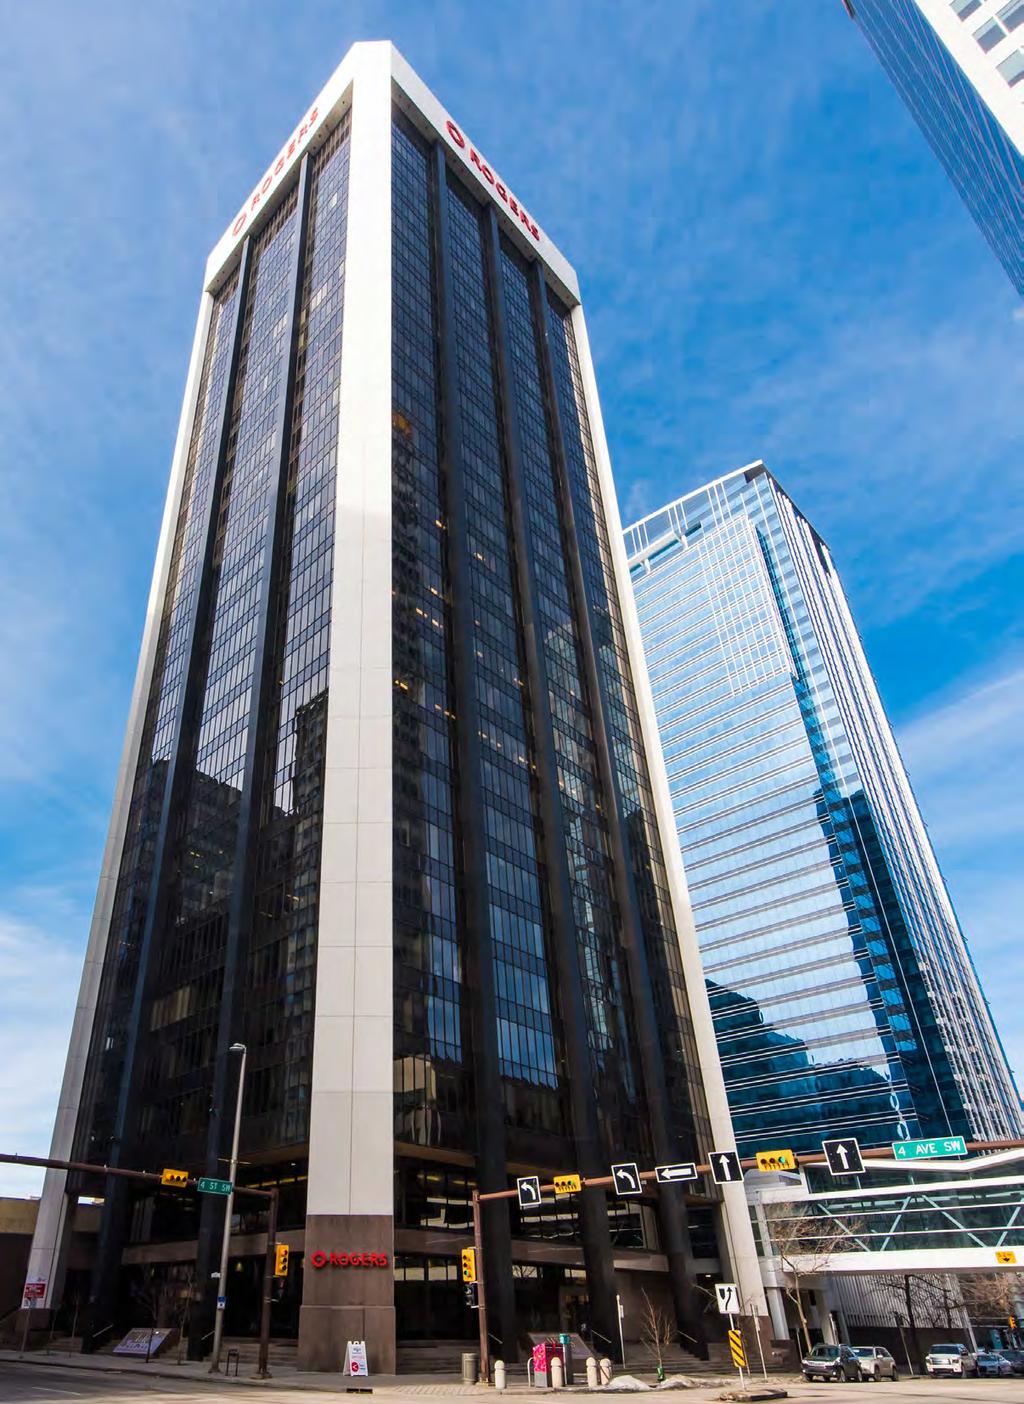 Altius Centre is a,000 square foot, -storey office building in downtown Calgary situated at a prominent location.